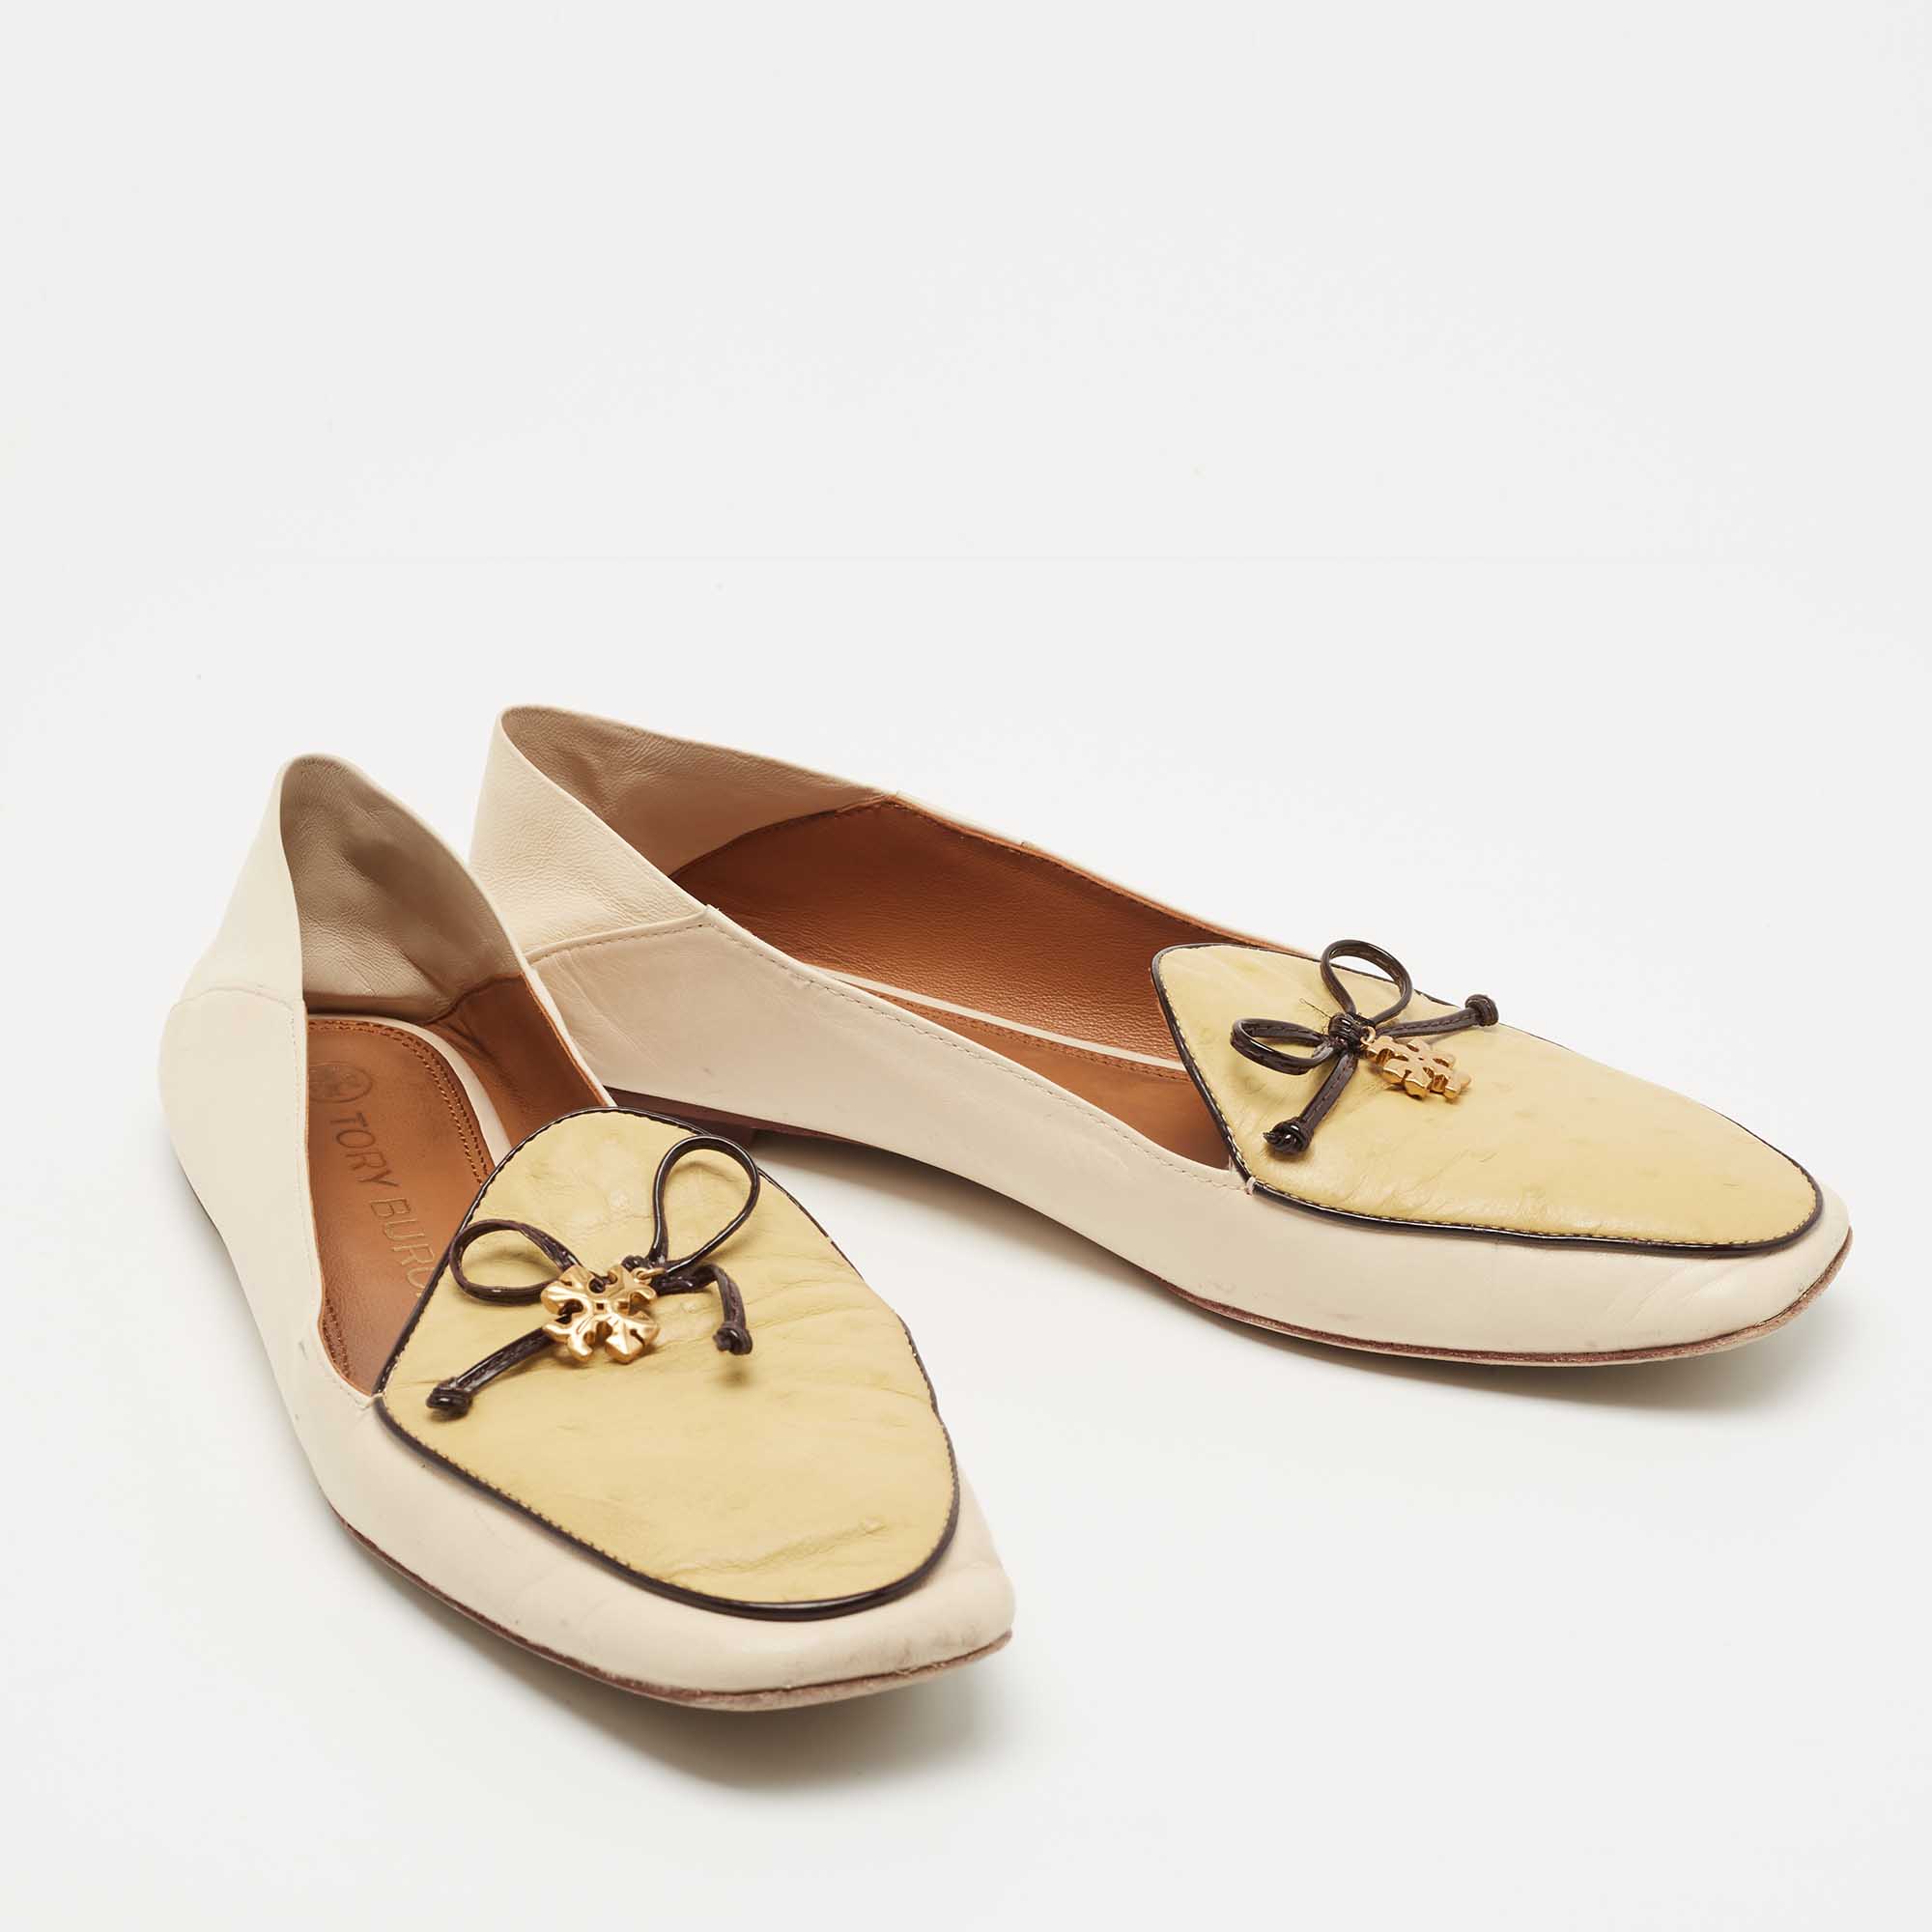 Tory Burch Beige/Cream Leather And Ostrich Embossed Charm Loafers Size 40